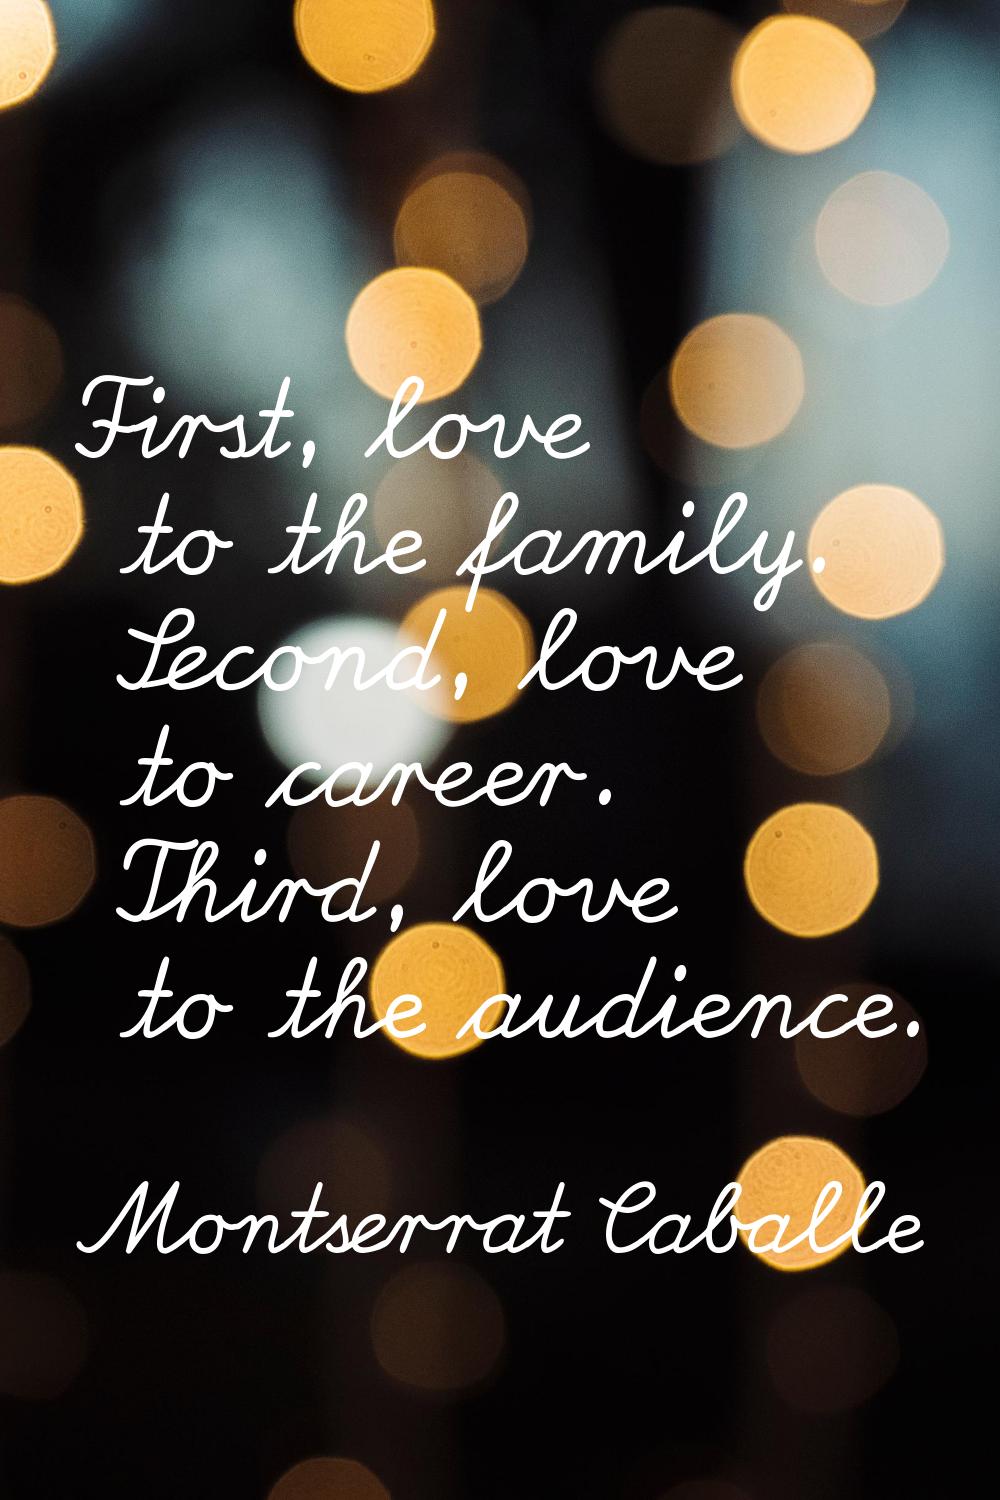 First, love to the family. Second, love to career. Third, love to the audience.